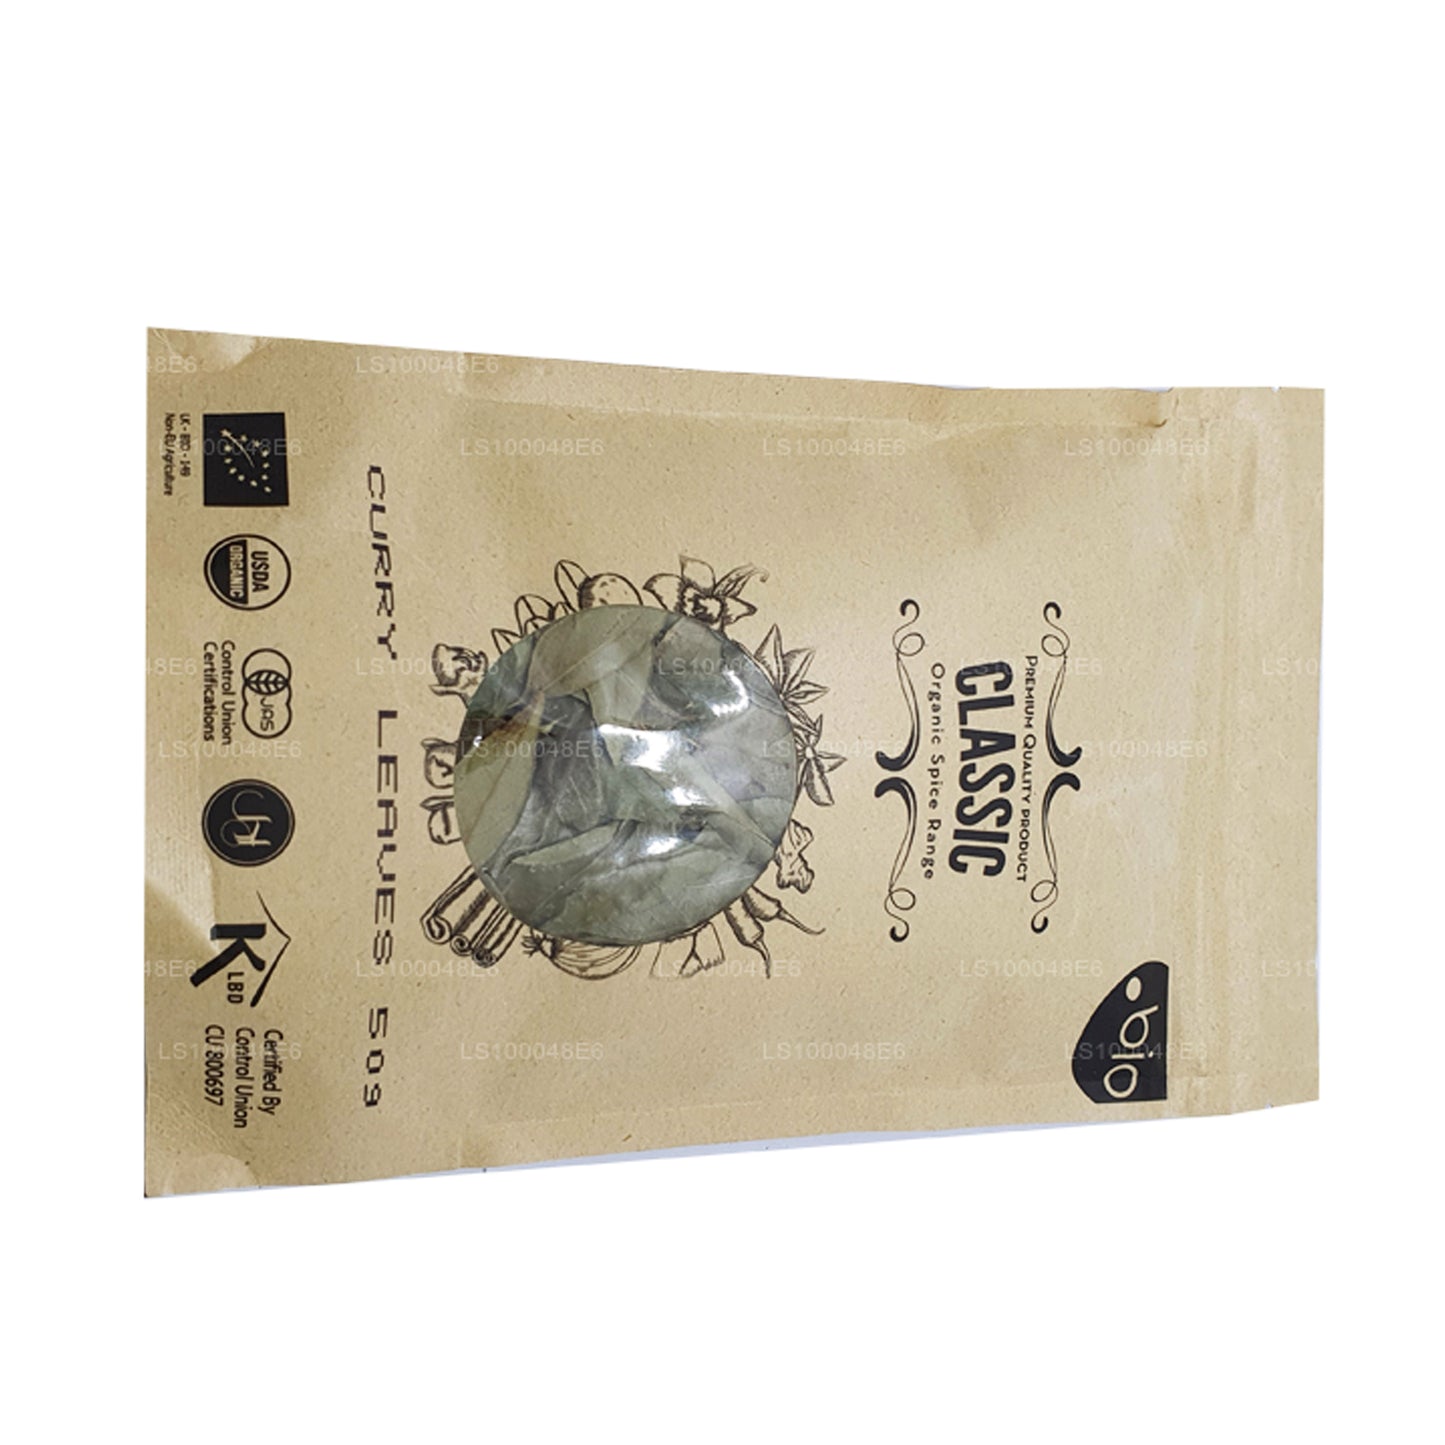 Lakpura Organic Dehydrated Curry Leaves